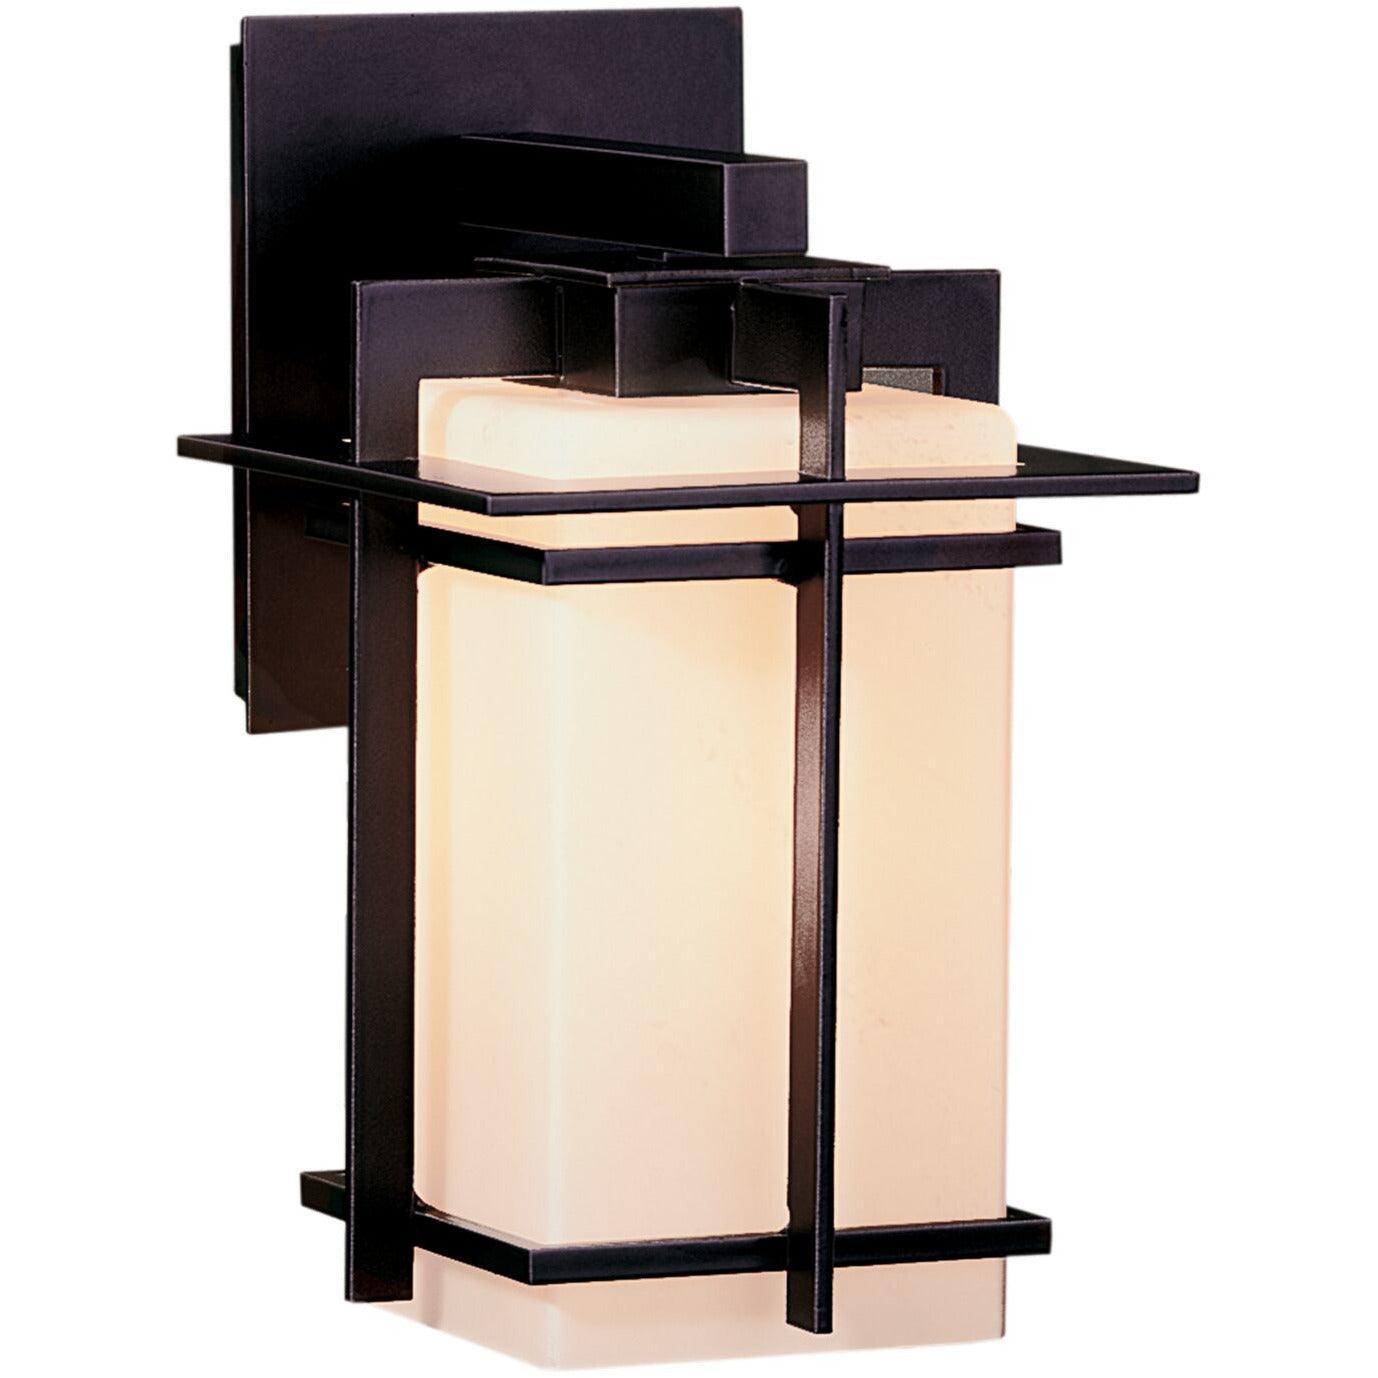 Hubbardton Forge - Tourou 11-Inch Outdoor Wall Sconce - 306007-SKT-77-GG0111 | Montreal Lighting & Hardware